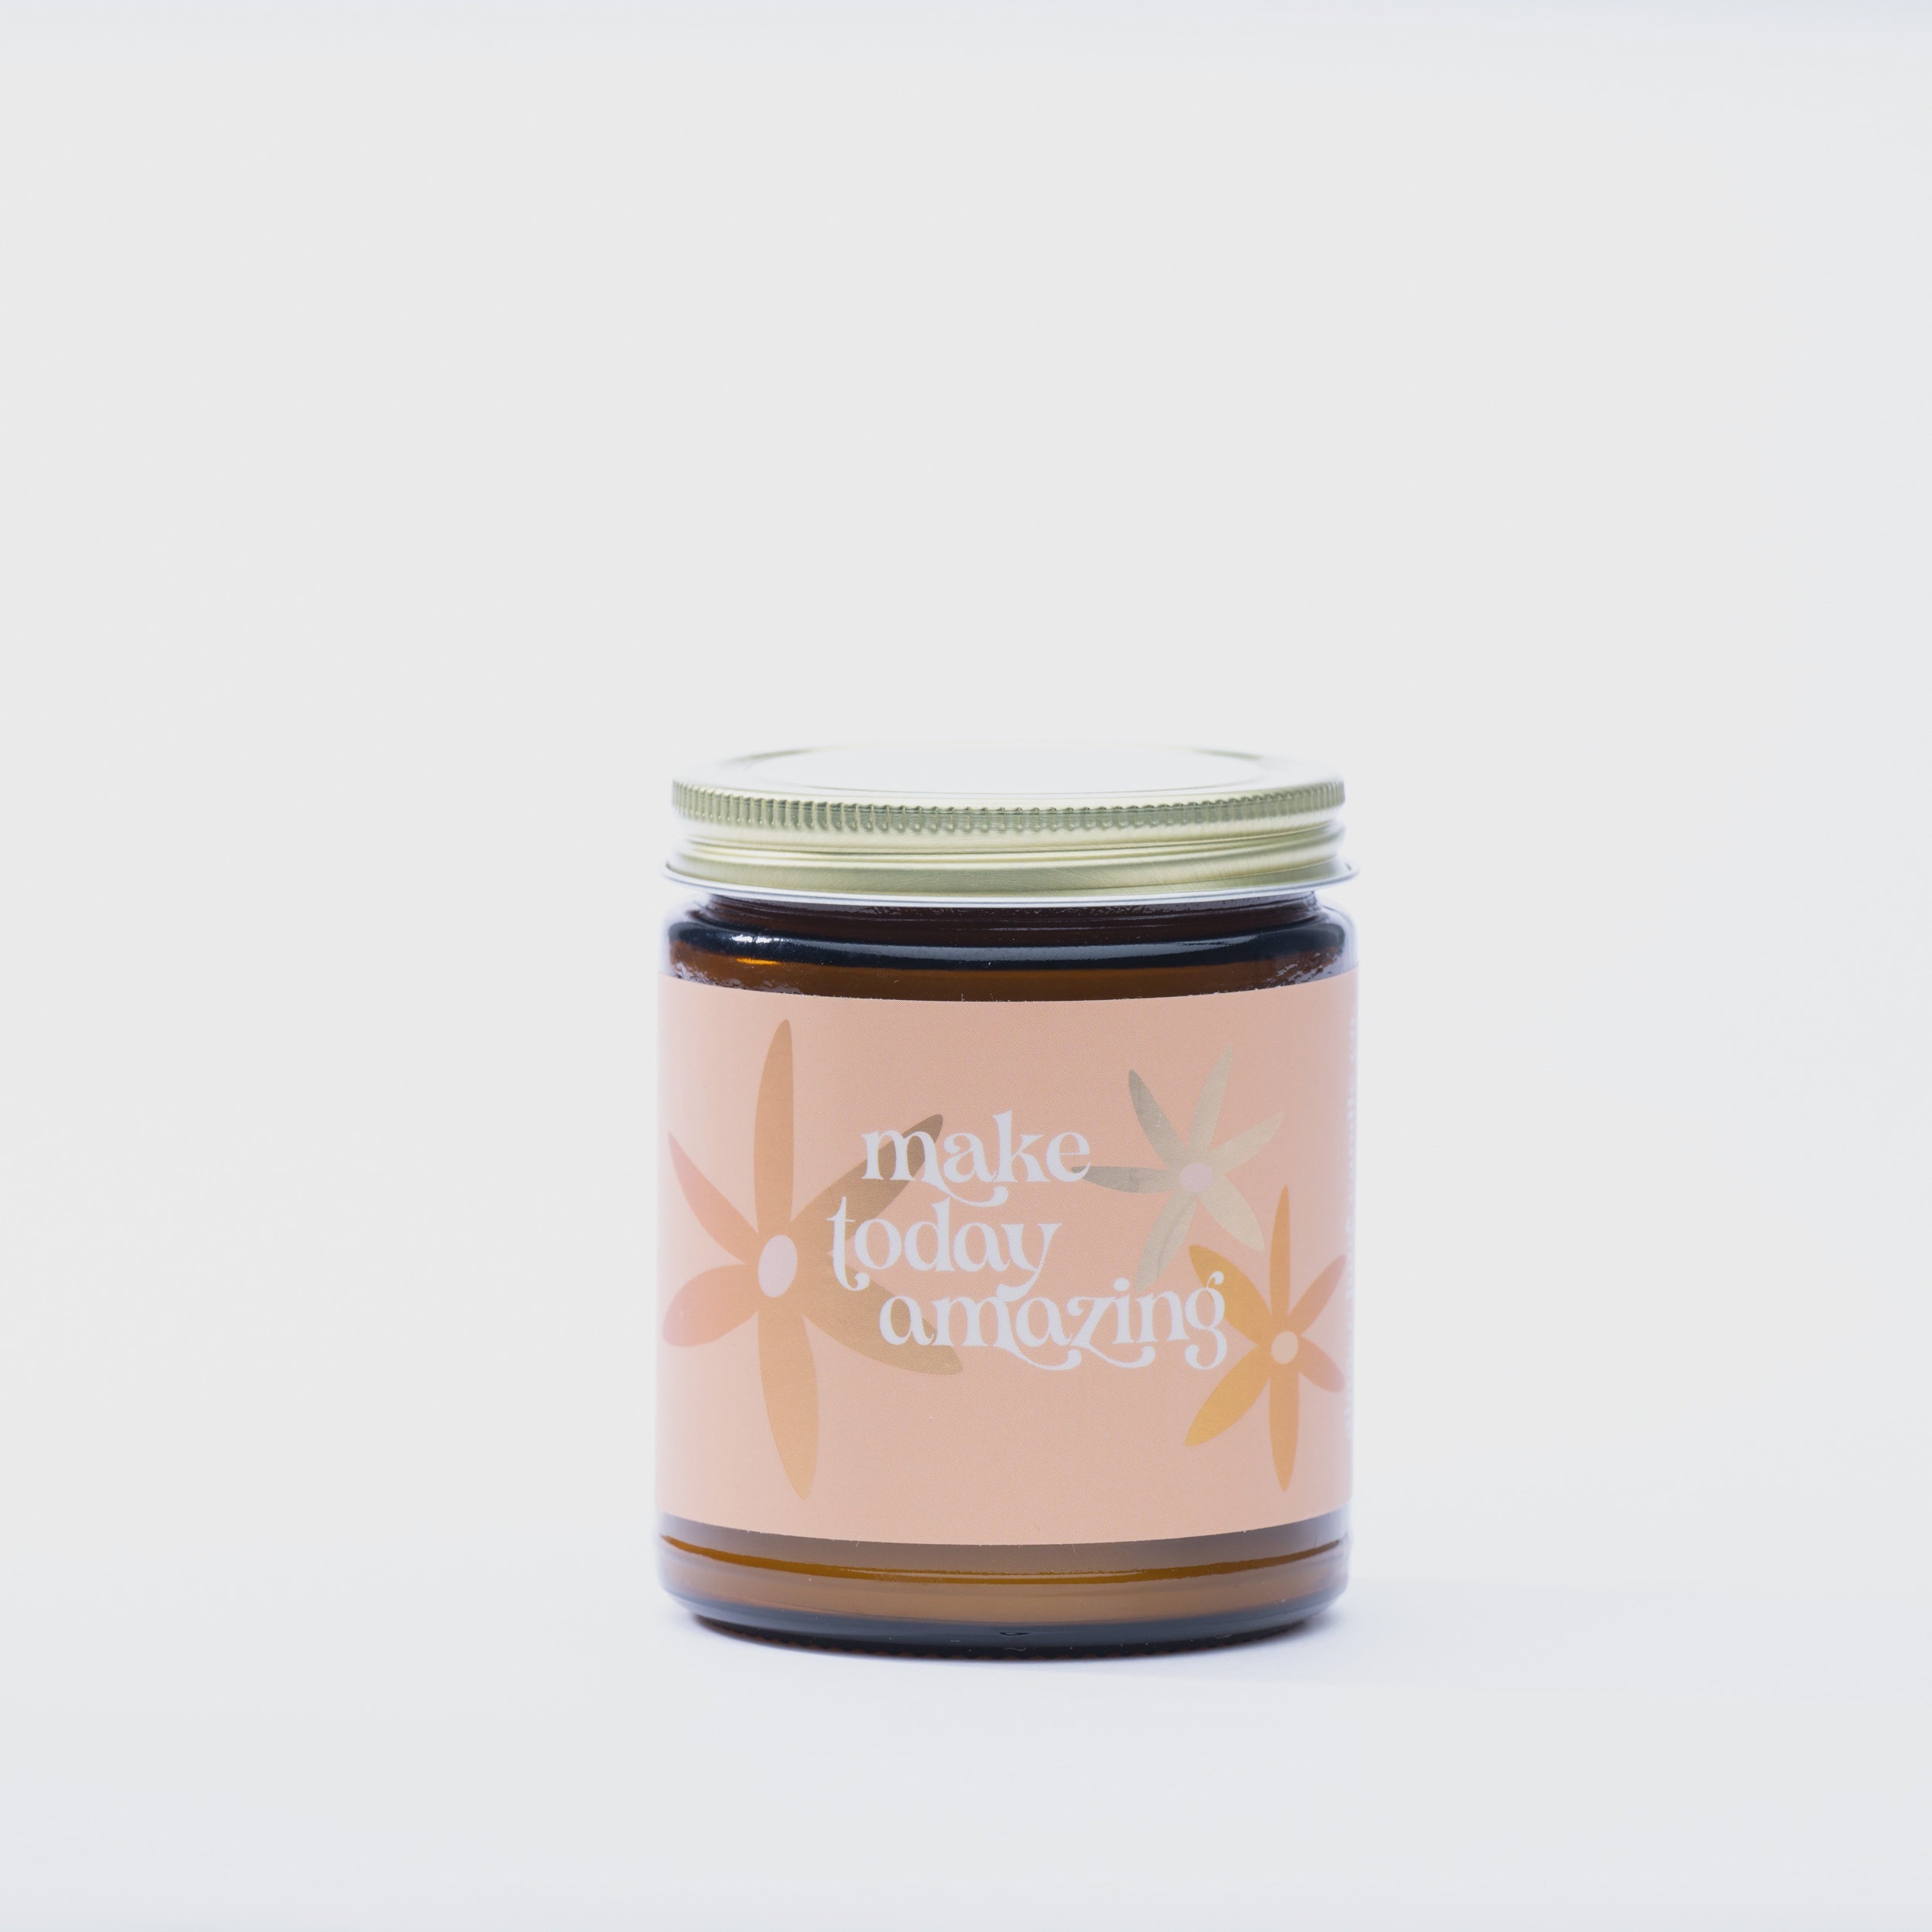 The Make Today Amazing Candle by Ginger June Candle Co.